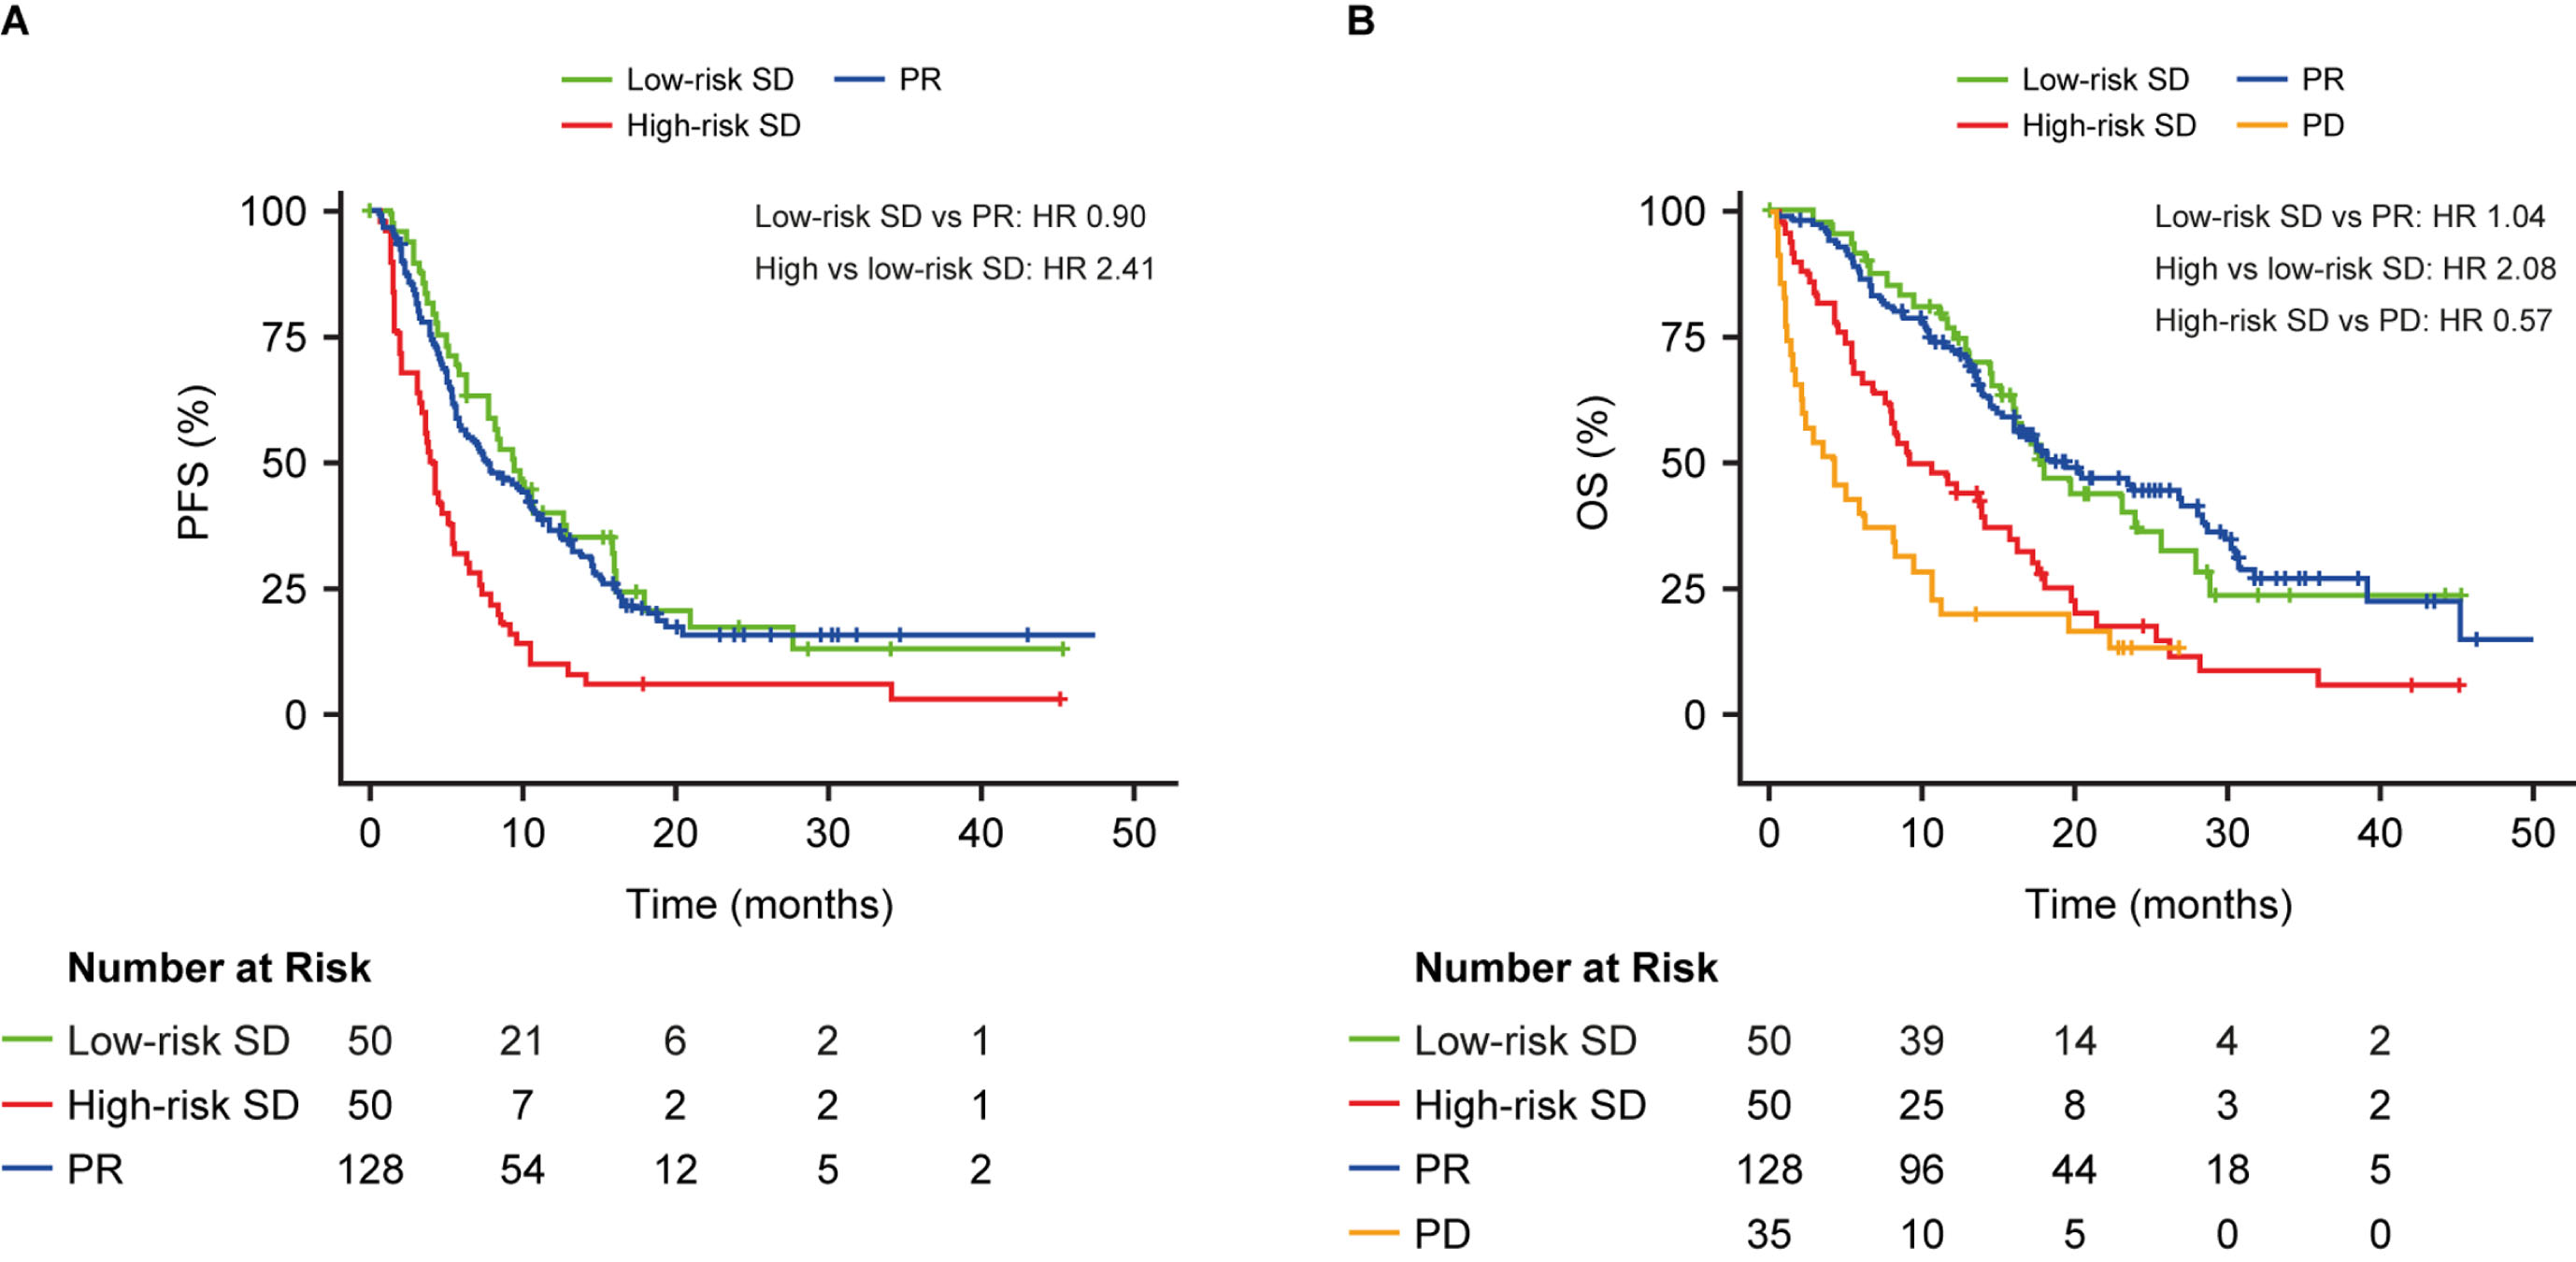 Progression-free survival (A) and overall survival (B) in patients with stable disease at the first CT scan after the second cycle in those with ADC or SCC stratified into high- and low-risk groups by CYFRA 21-1, CA 125, CEA and the interaction term between histology and each biomarker, above or below median. Results are compared to patients with PR (A) or PR and PD (B). The C-index was calculated based on a model that included the continuous form of the biomarkers. HR, hazard ratio; OS, overall survival; PD, progressive disease; PFS, progression-free survival; PR, partial response; SD, stable disease.